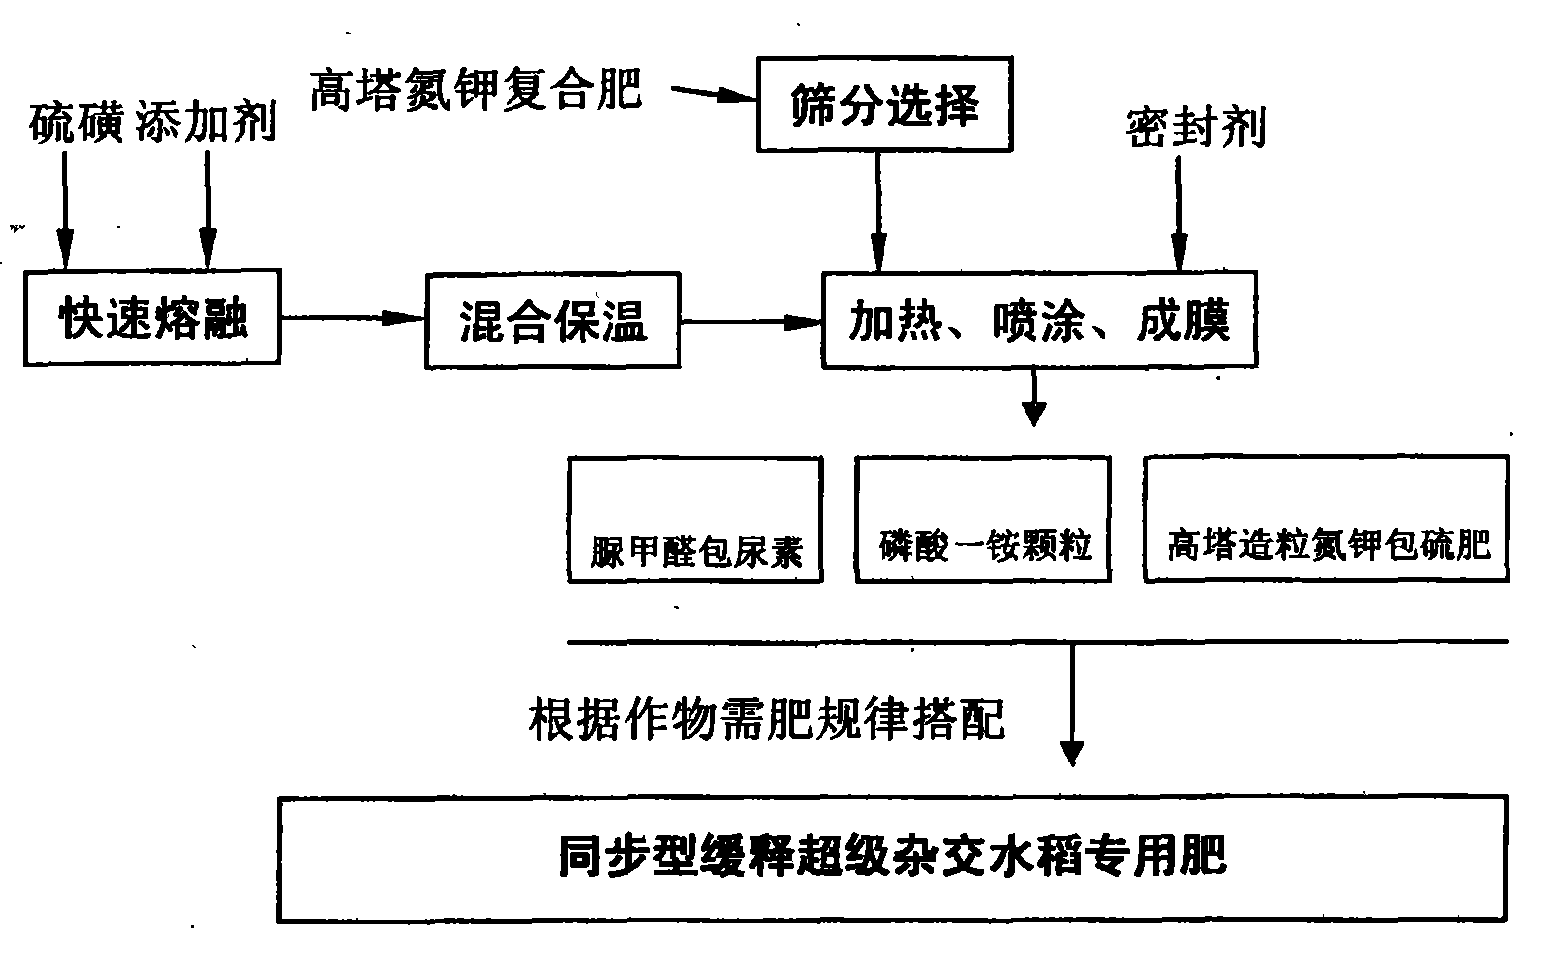 Synchronous slow-release fertilizer special for super hybrid rice and preparation method thereof